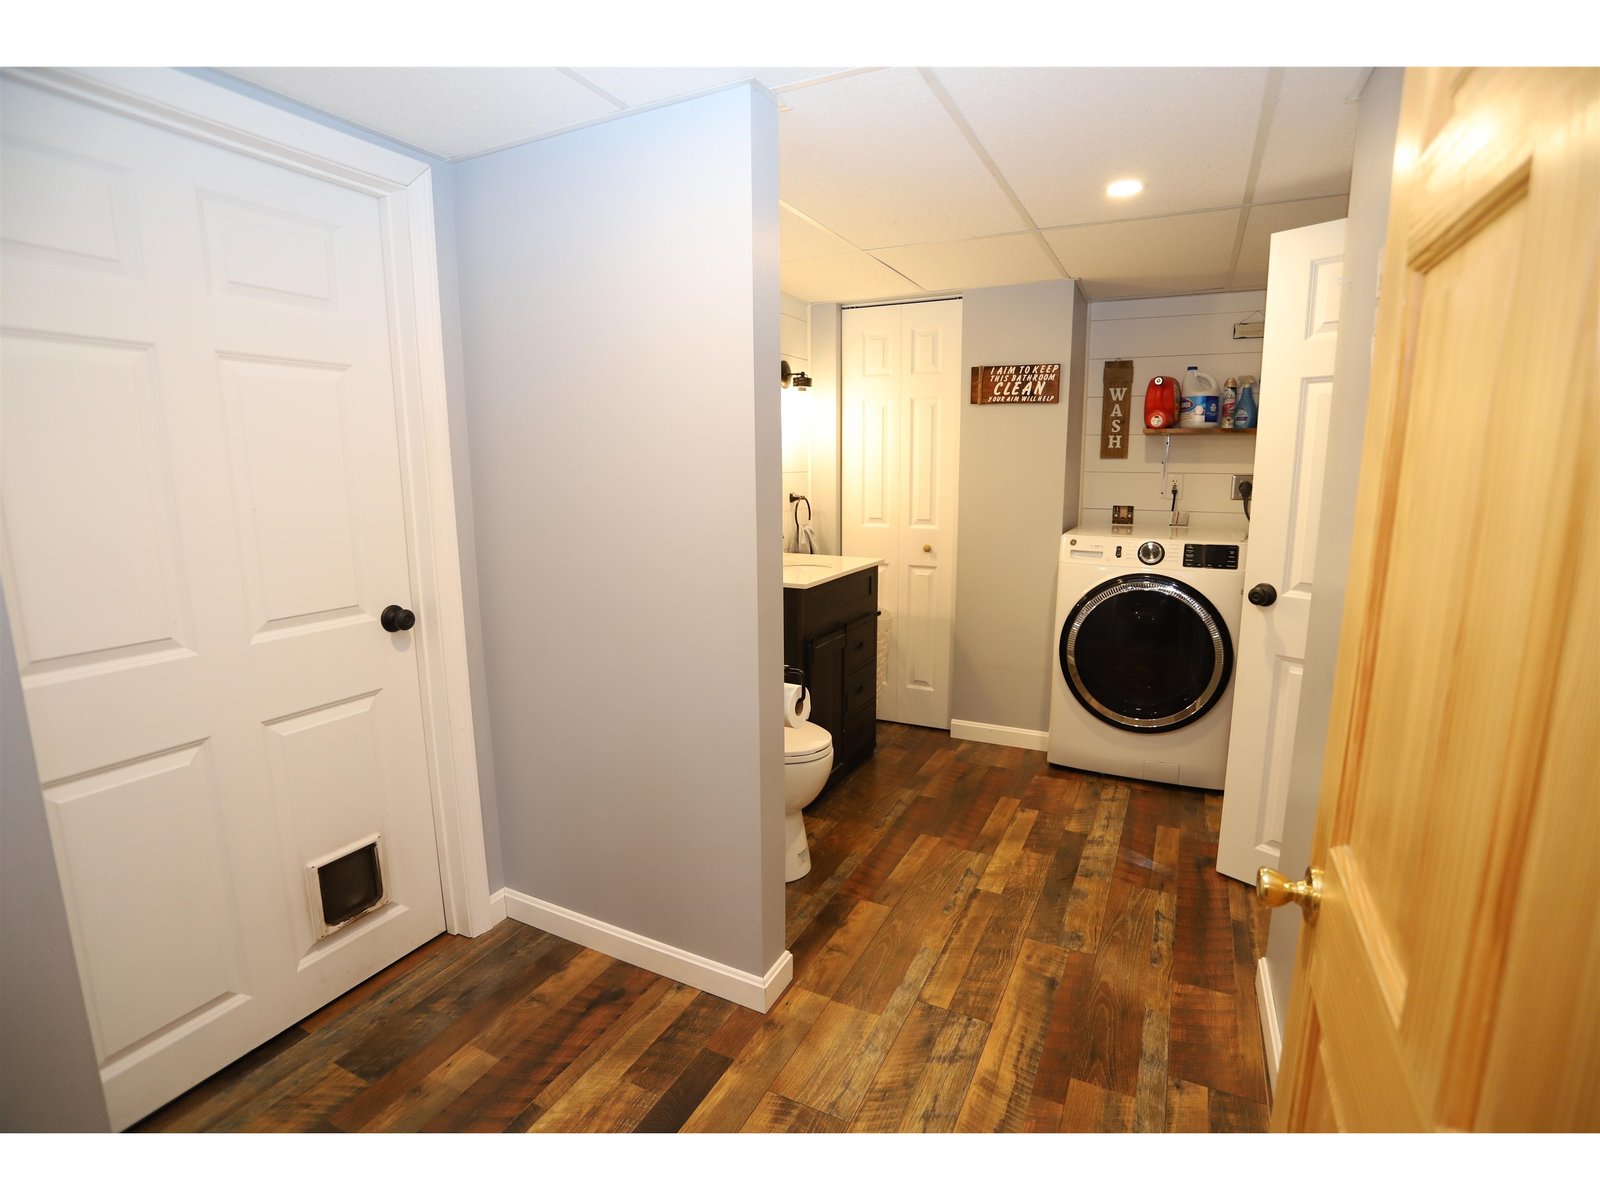 1/2 bath with laundry in the basement